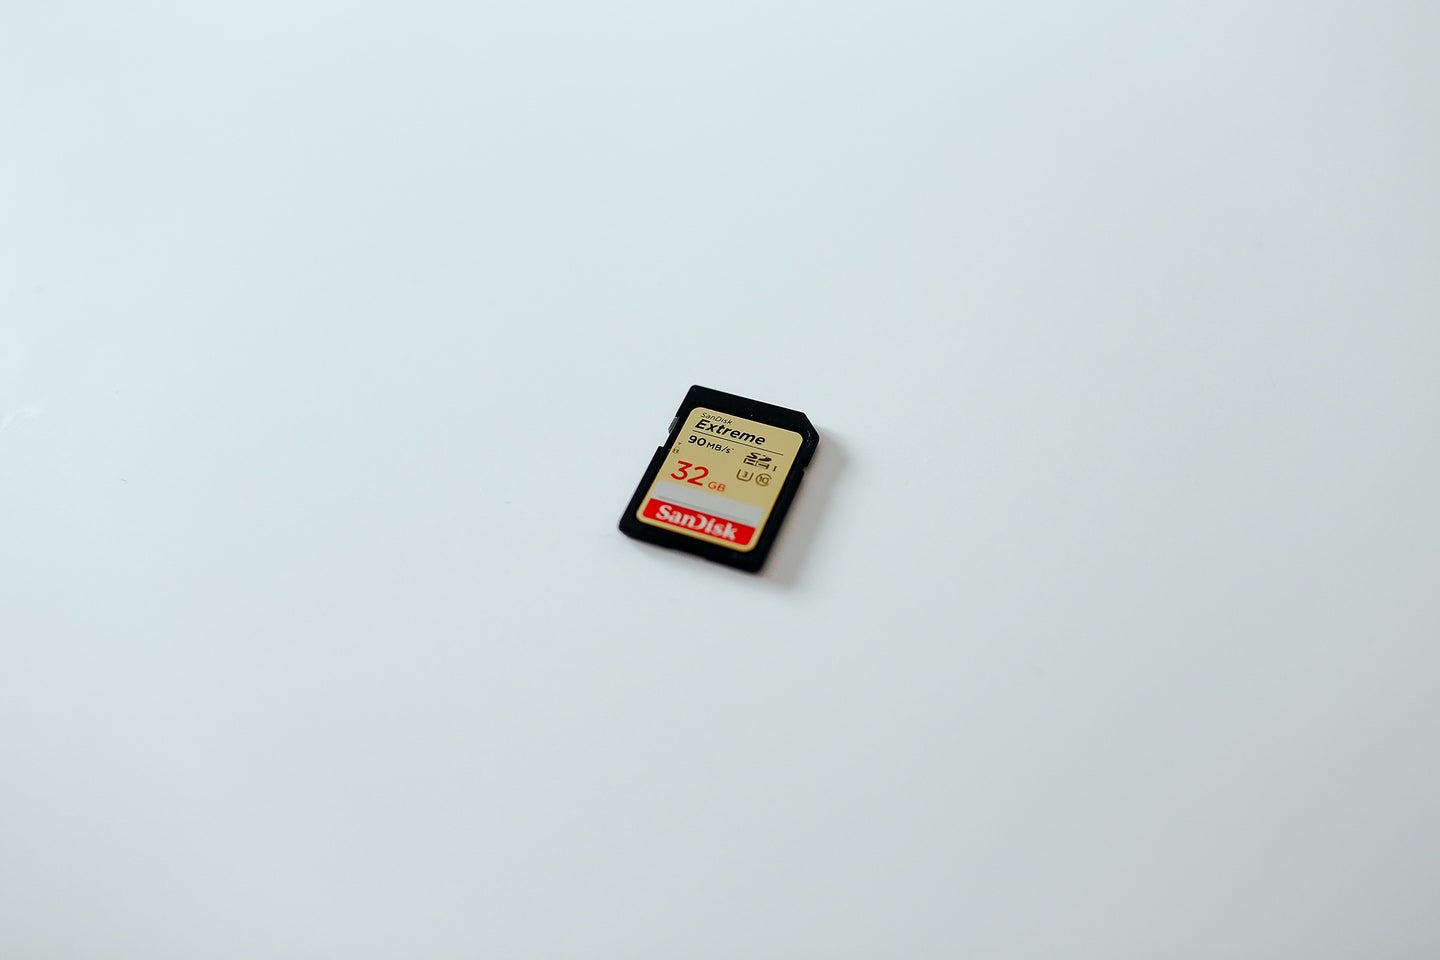 Fastest sd card on a white surface